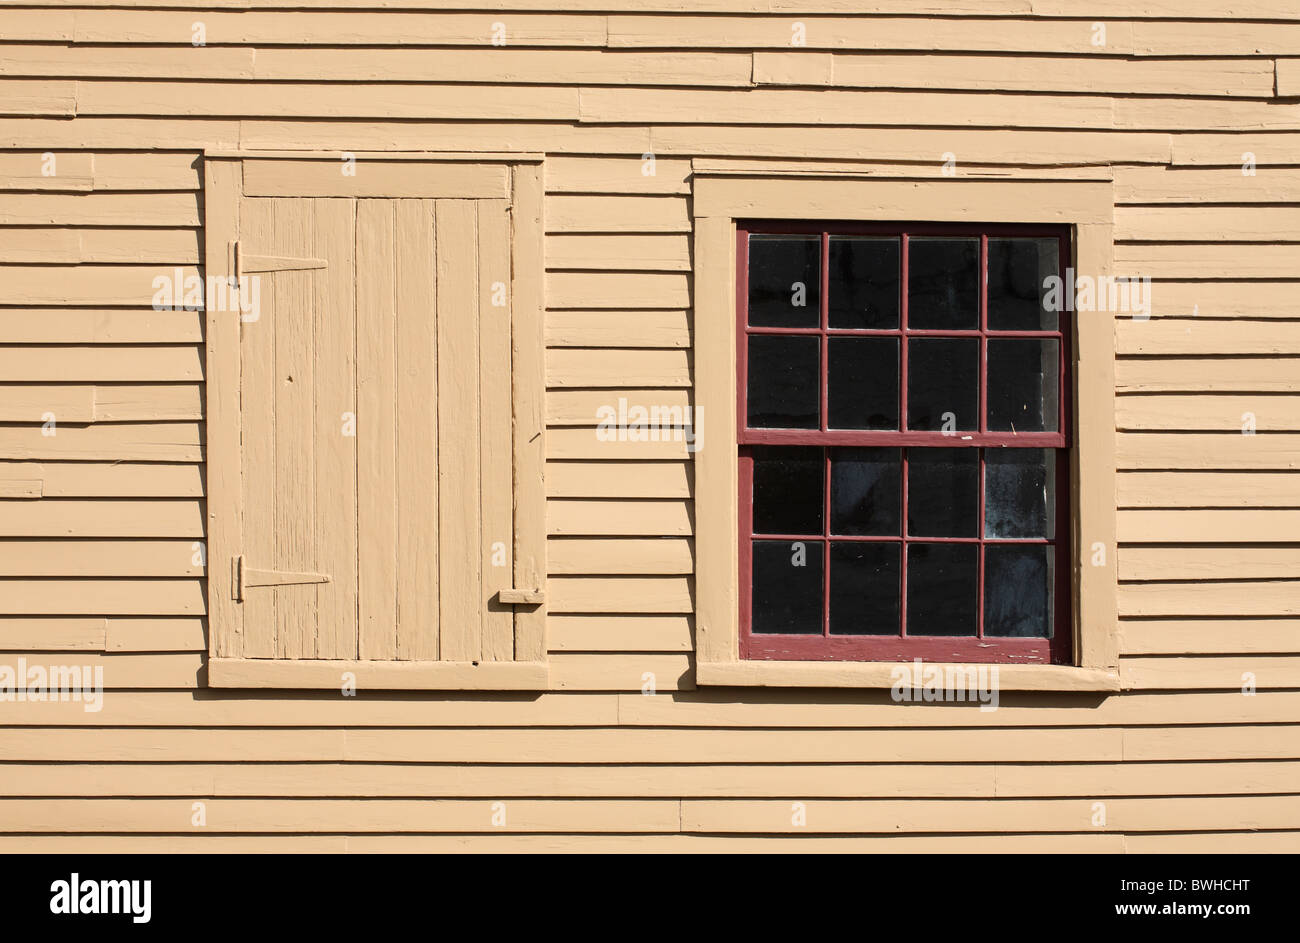 Wooden building detail Canterbury Shaker Village, New Hampshire, USA Stock Photo